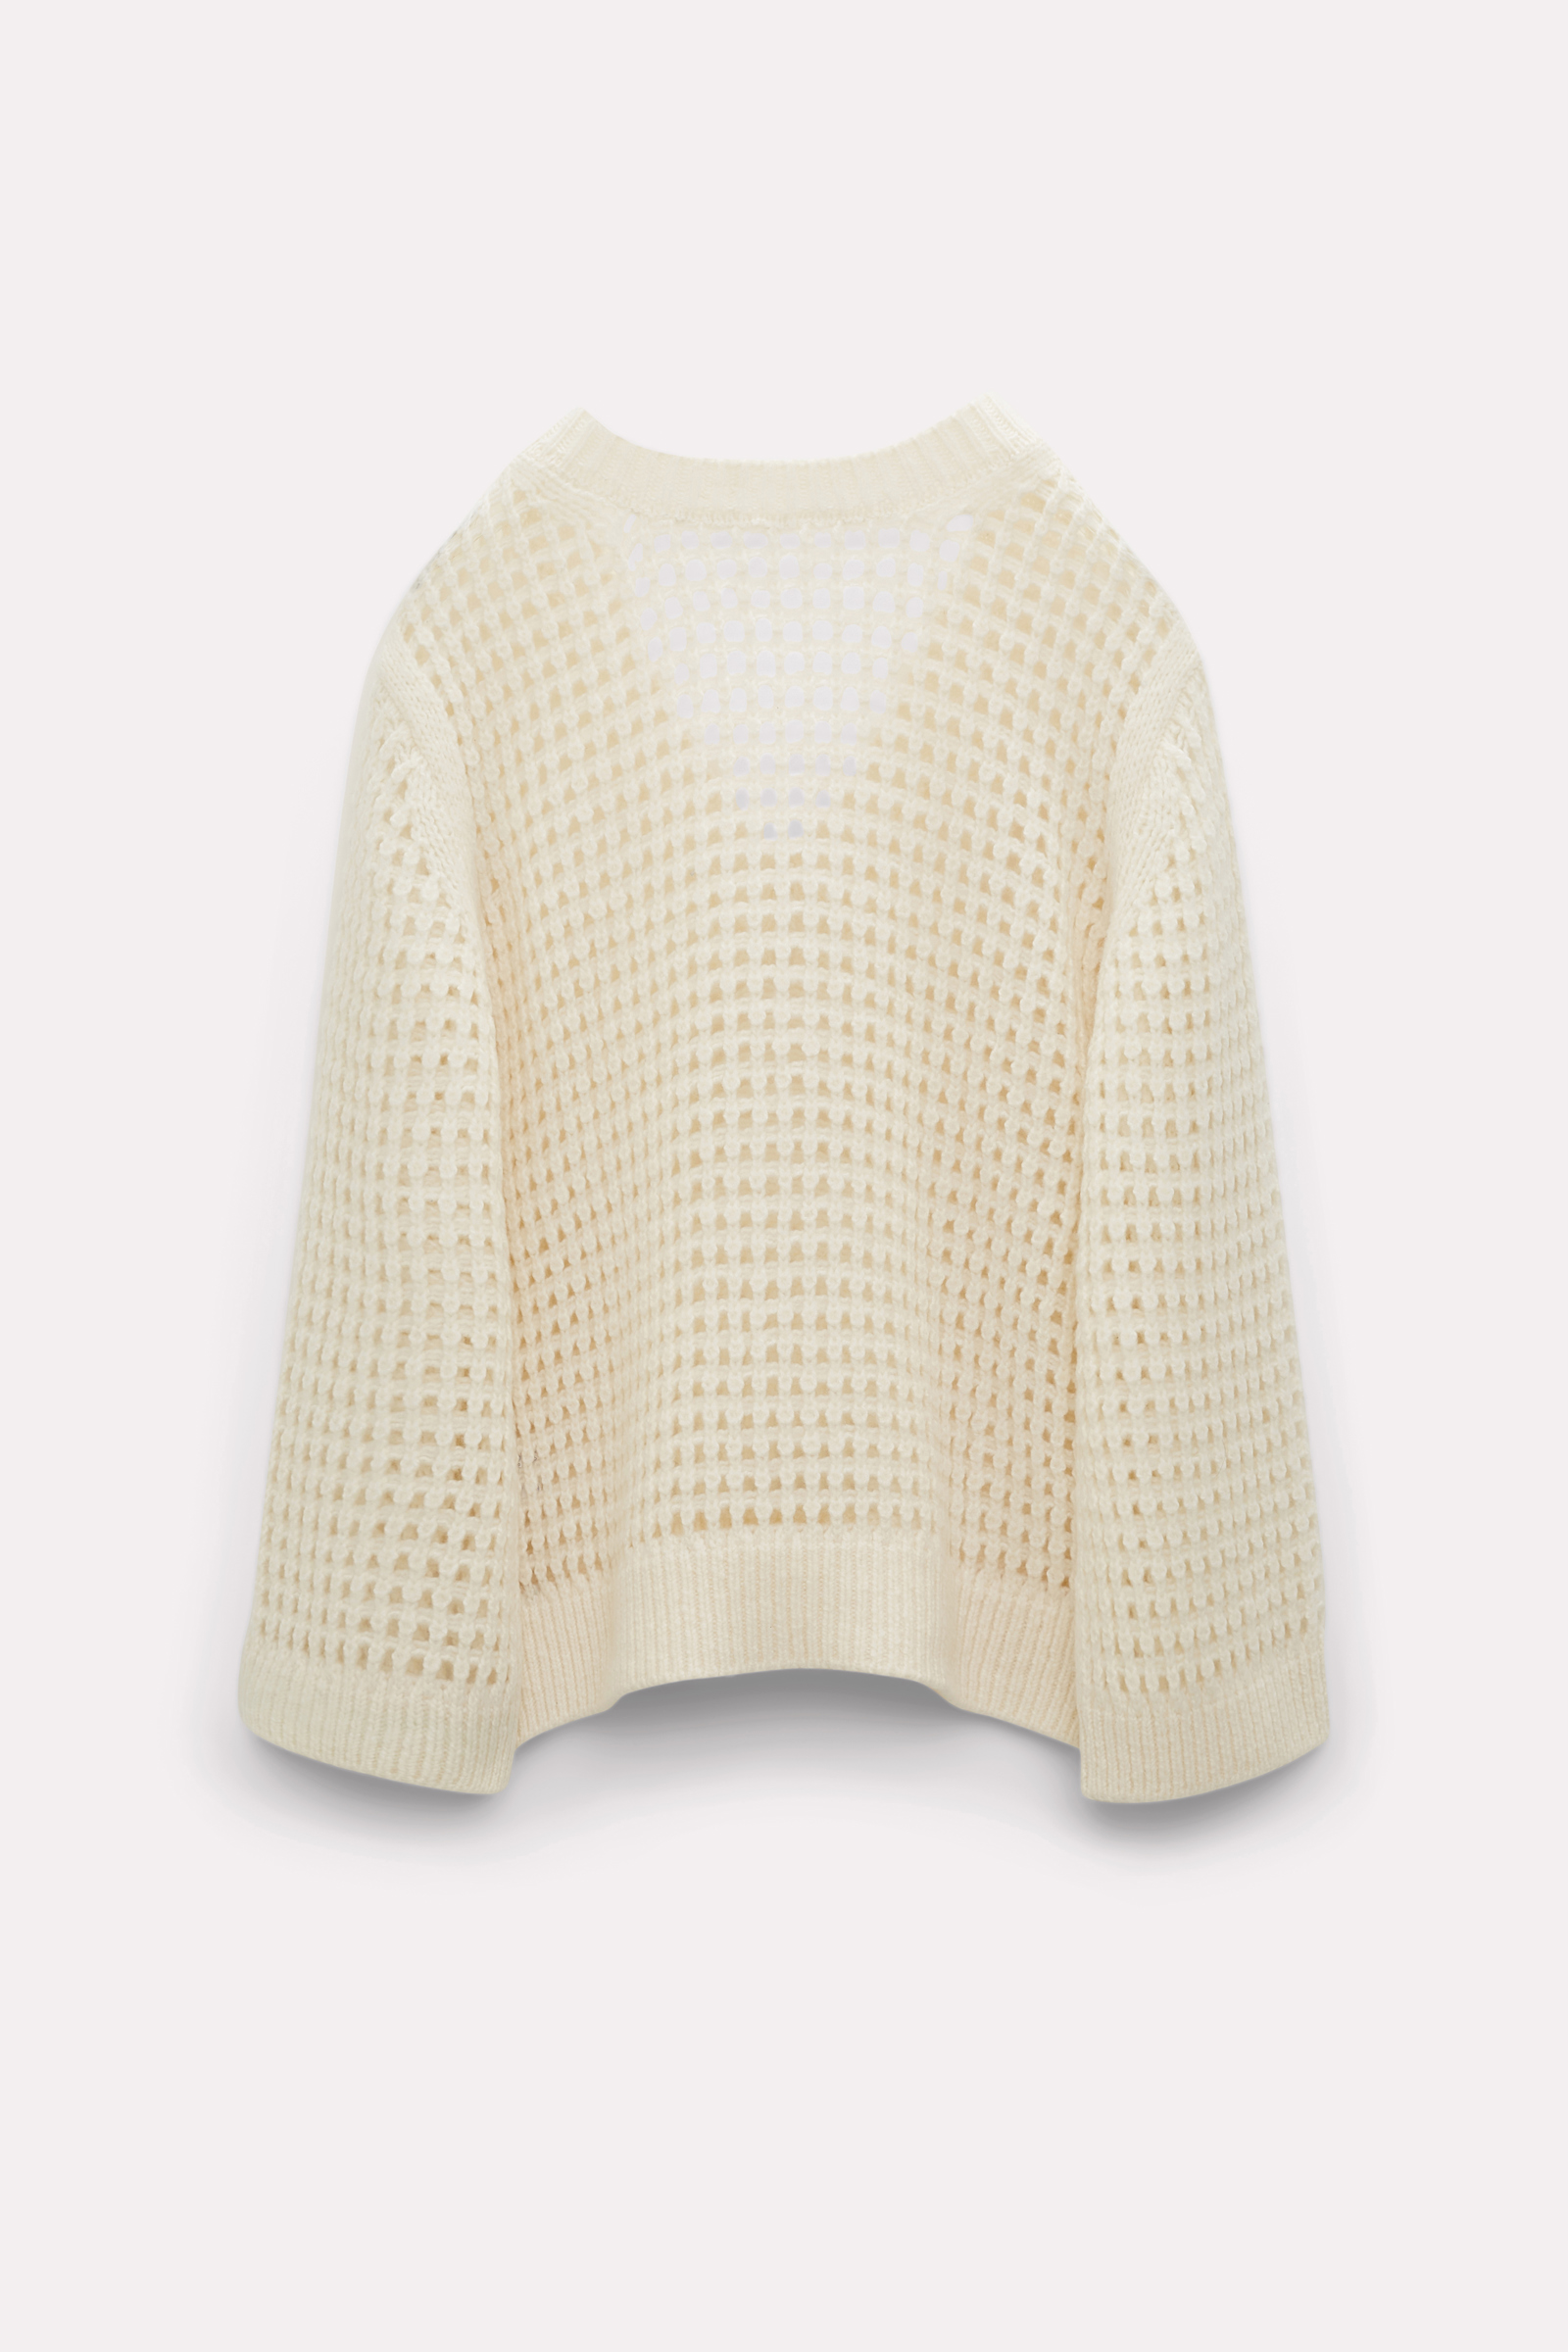 Dorothee Schumacher Open knit v-neck sweater in wool-cashmere orchid white